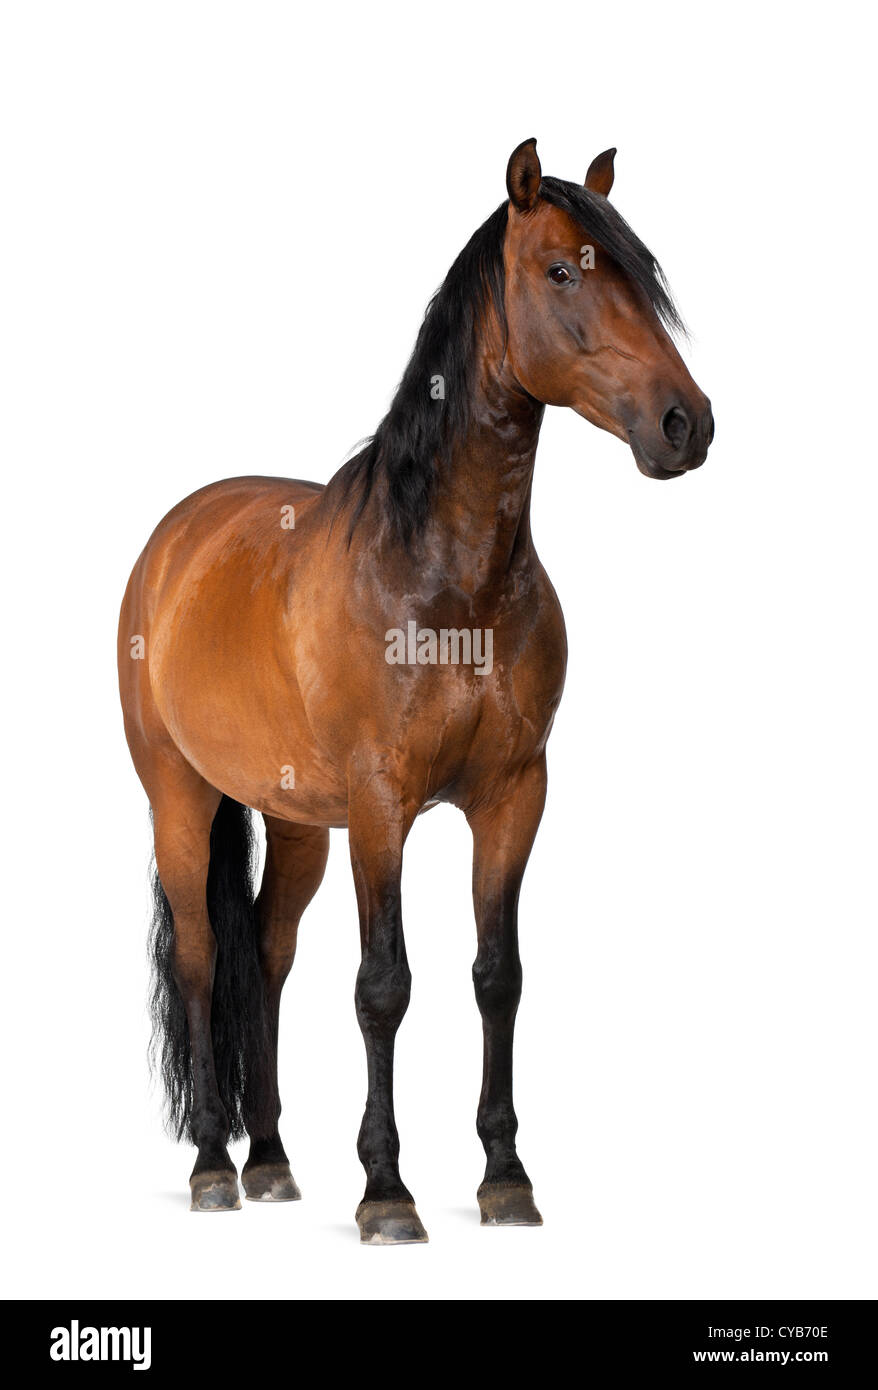 Mixed breed of Spanish and Arabian horse, 8 years old, standing against white background Stock Photo